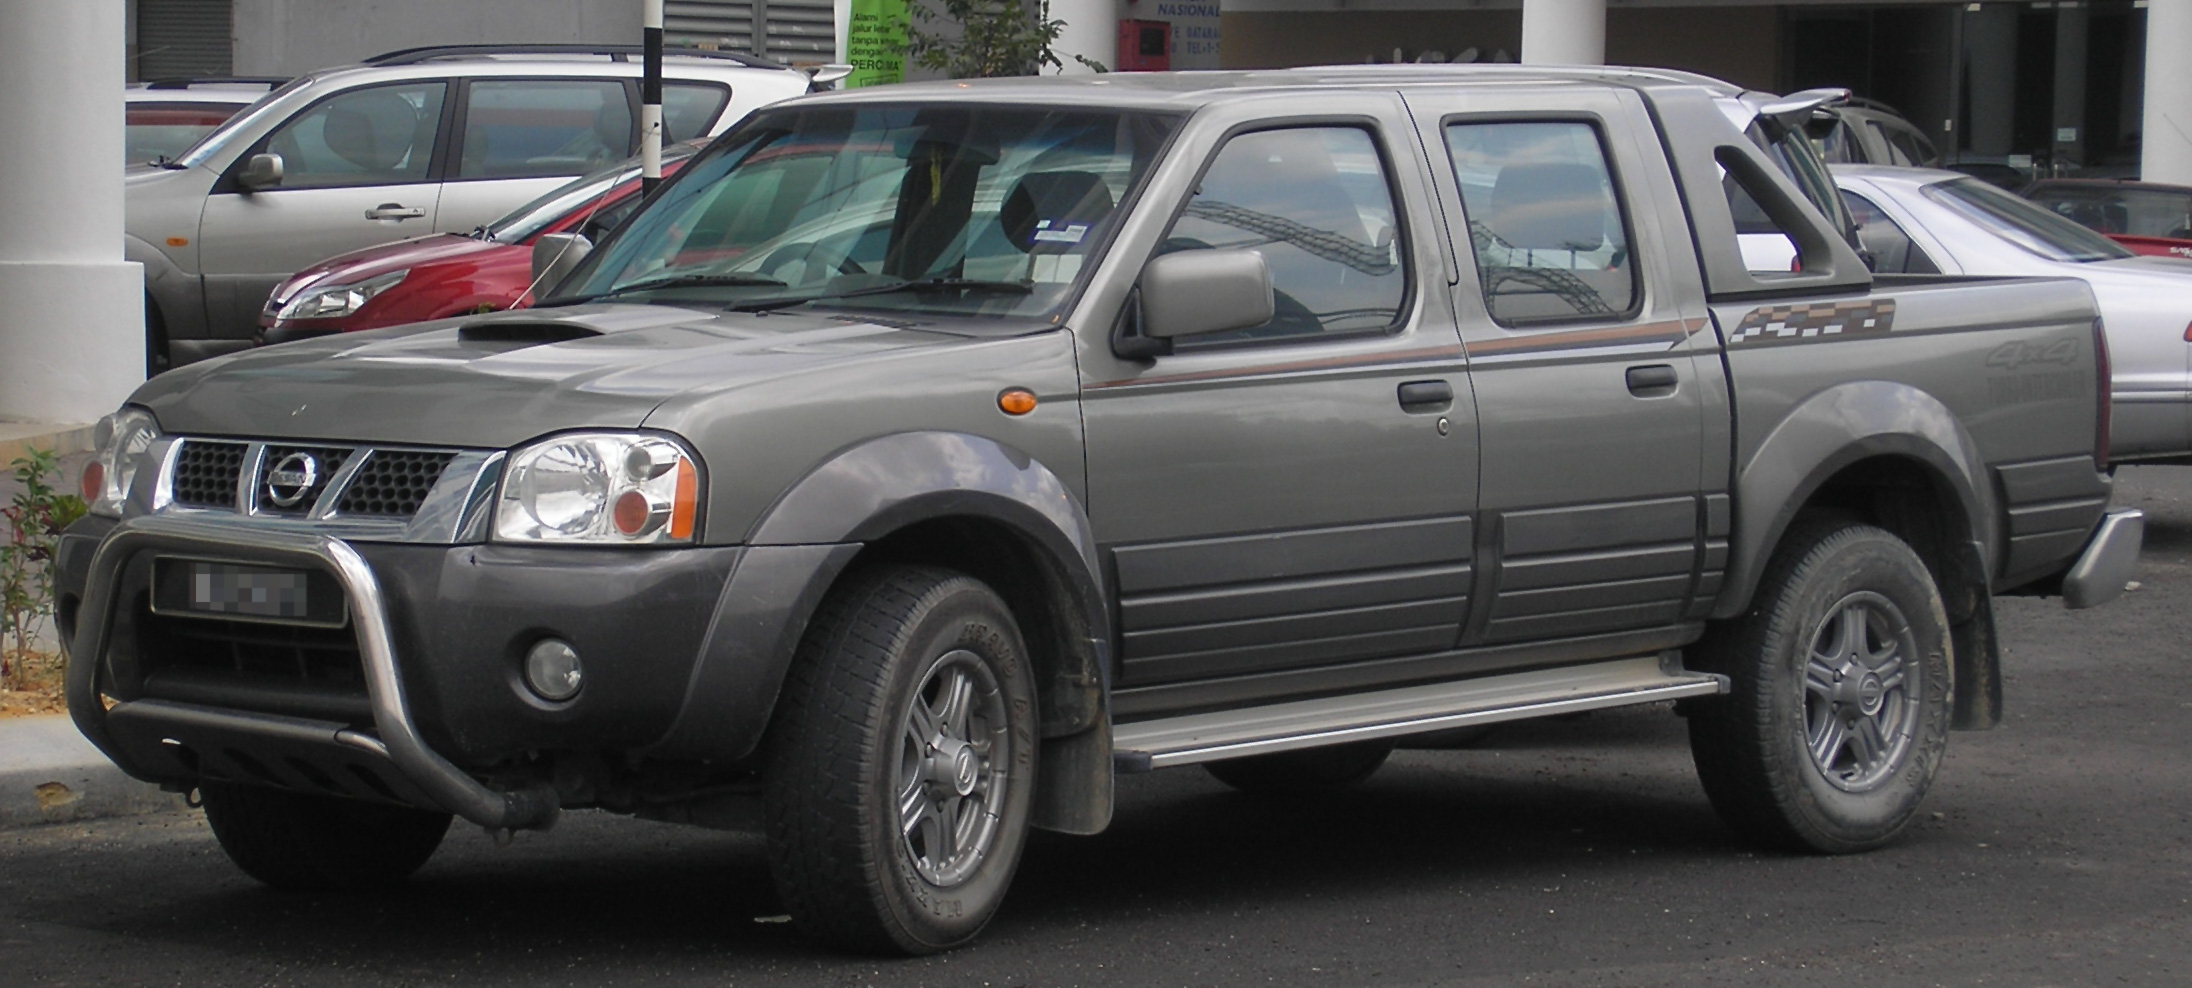 Nissan frontier malaysia